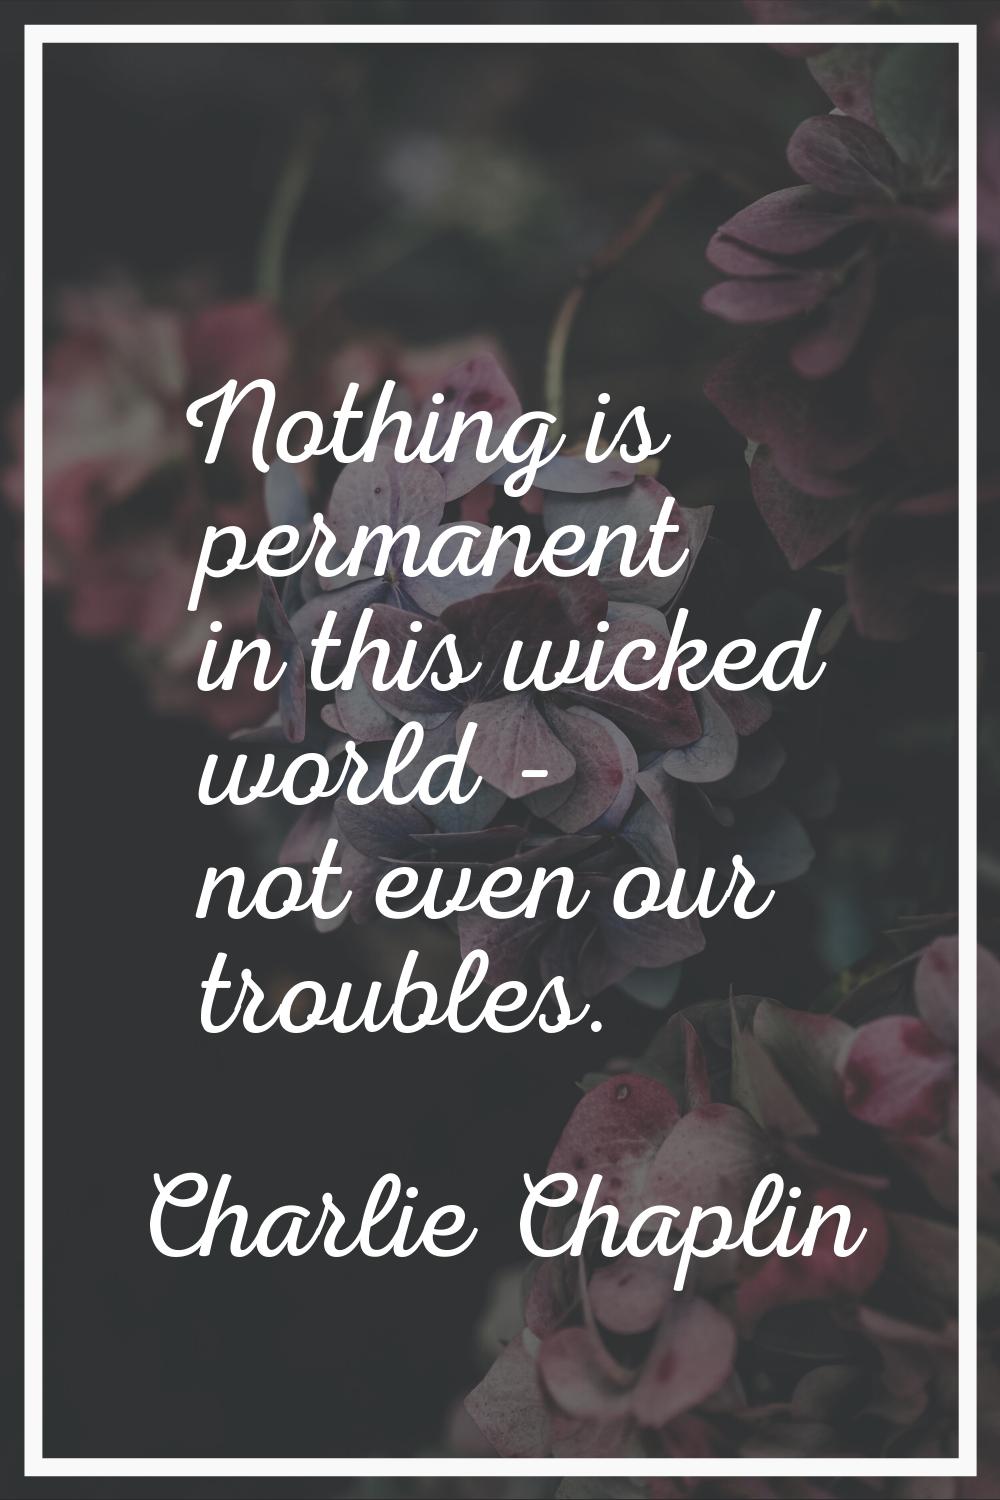 Nothing is permanent in this wicked world - not even our troubles.